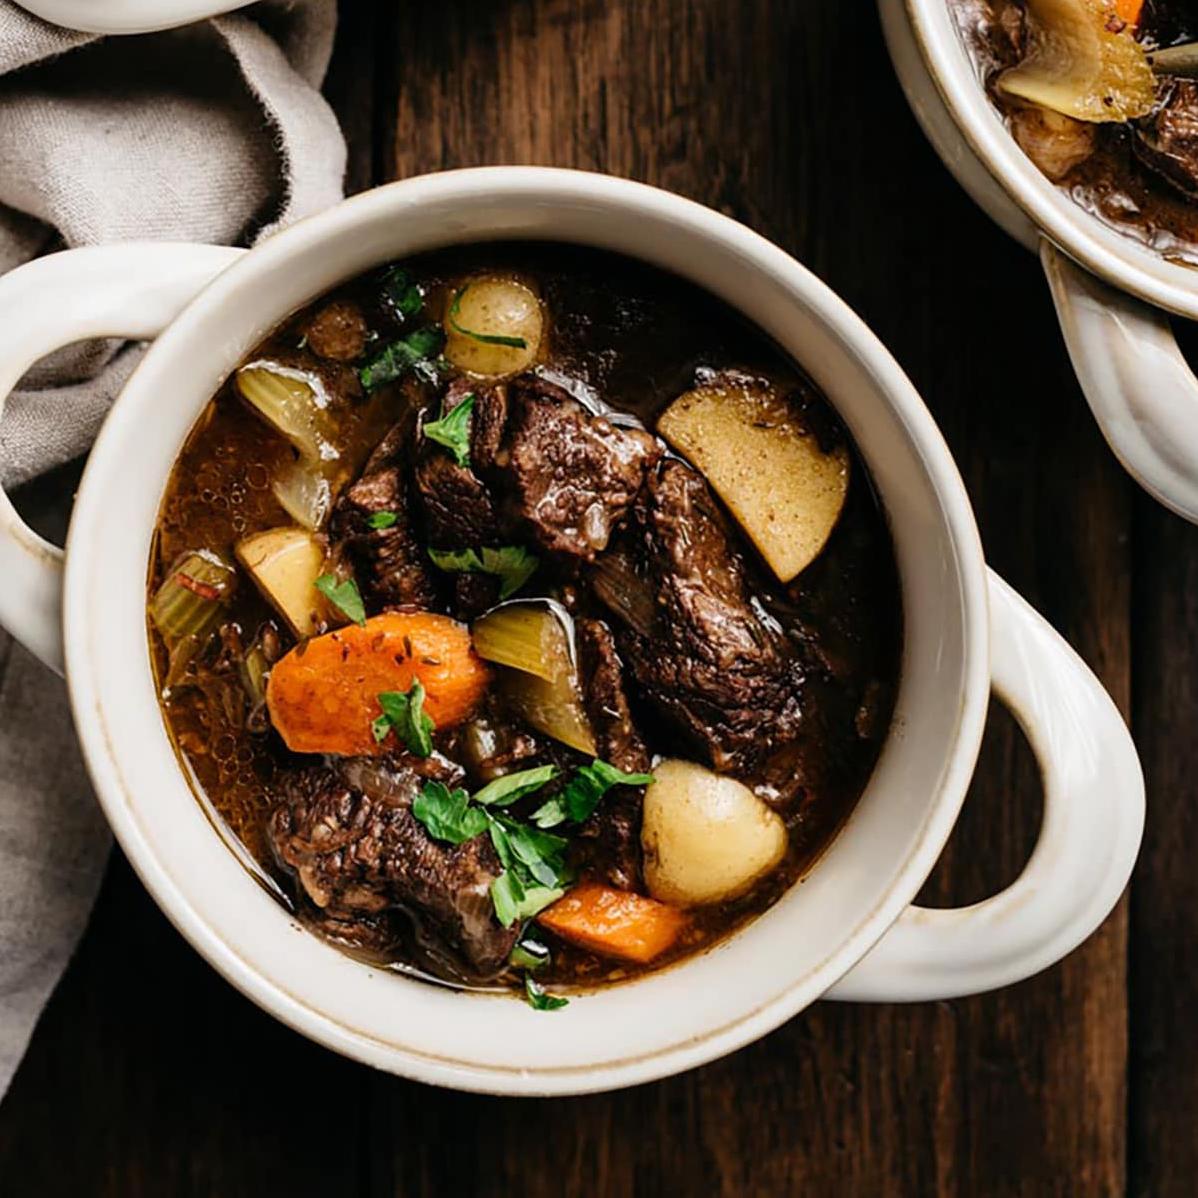  This beef soup with red wine is a one-pot wonder that's easy to make and full of nourishing ingredients.